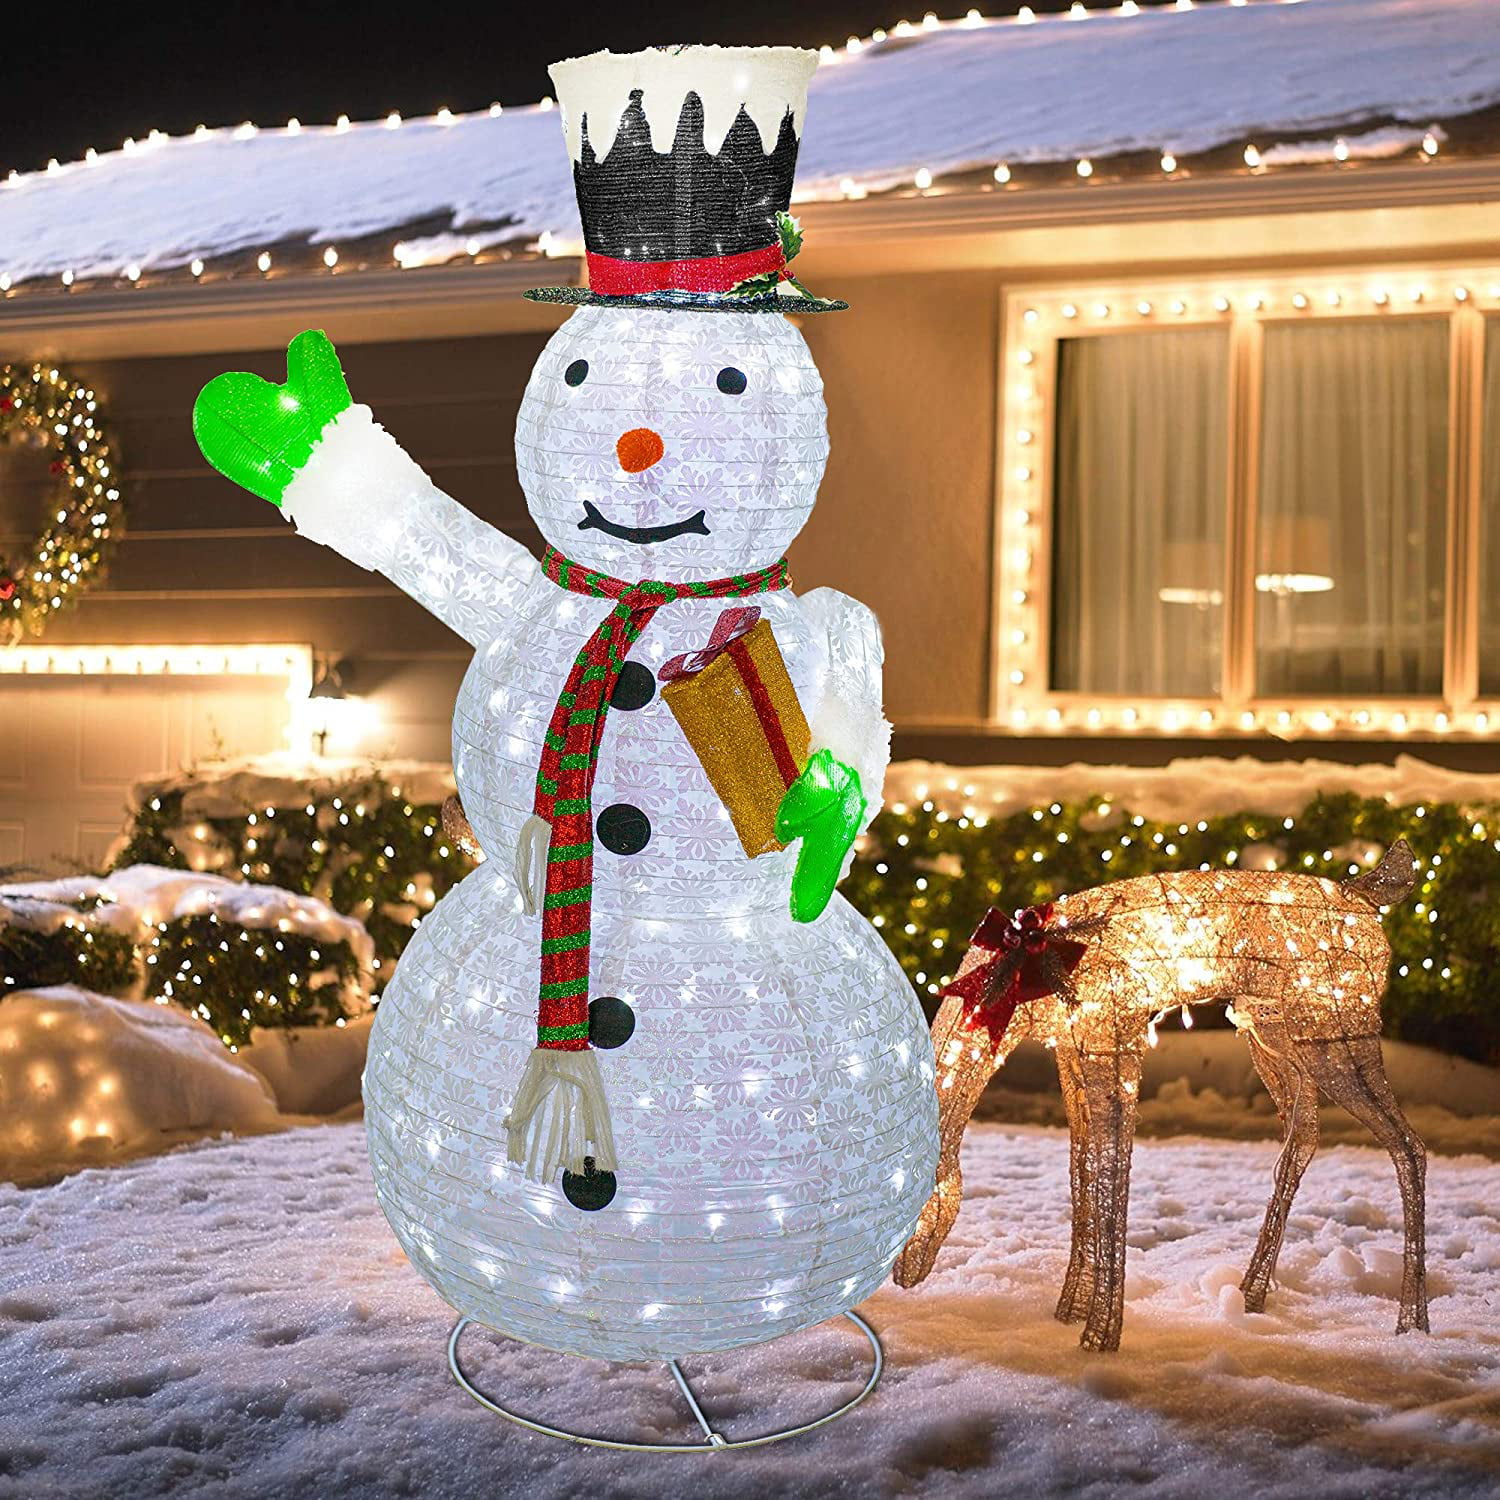 New Snowman Christmas Decorations for Large Space